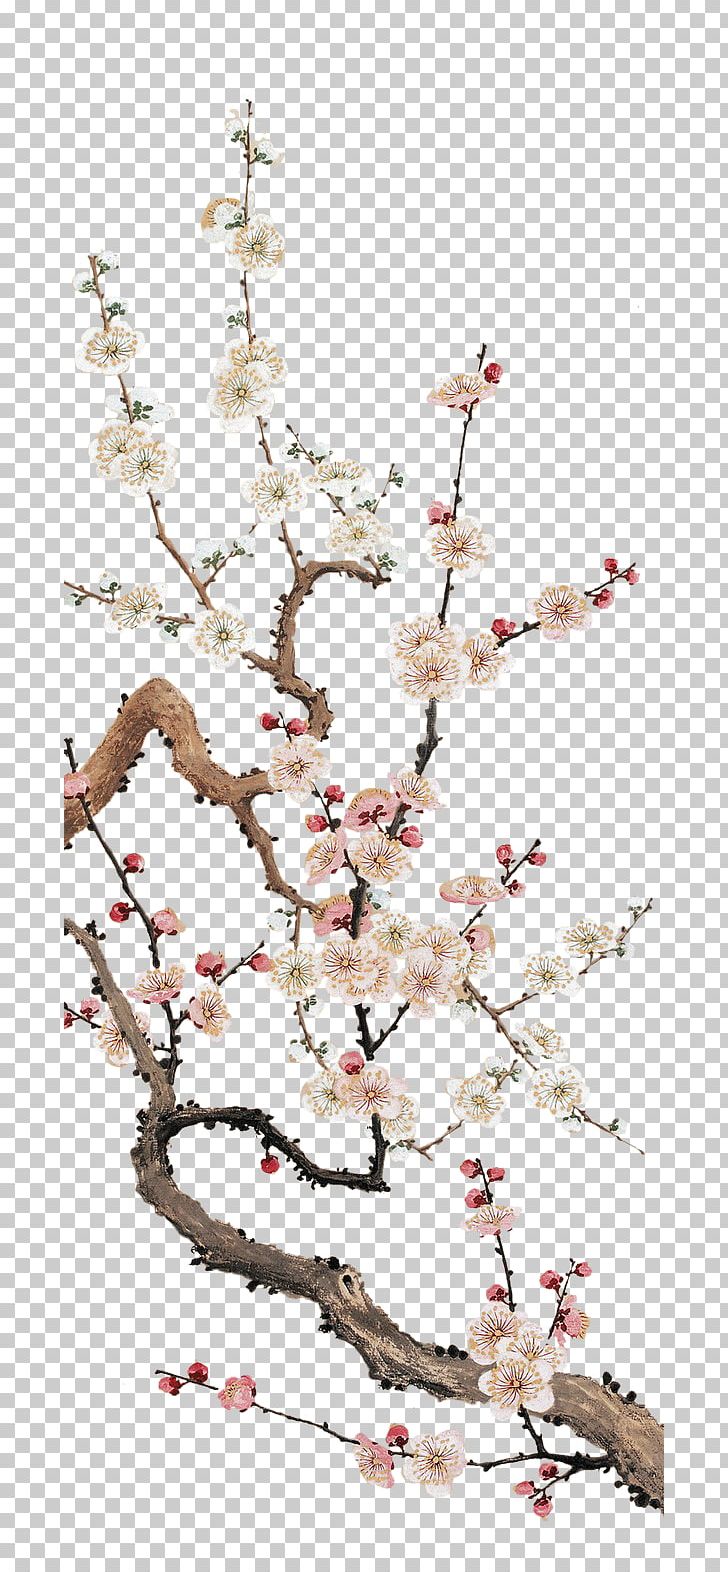 Cherry Blossom Plum Blossom Flower PNG, Clipart, Artificial Flower, Blossom, Branch, Cao Xueqin, Cartoon Free PNG Download